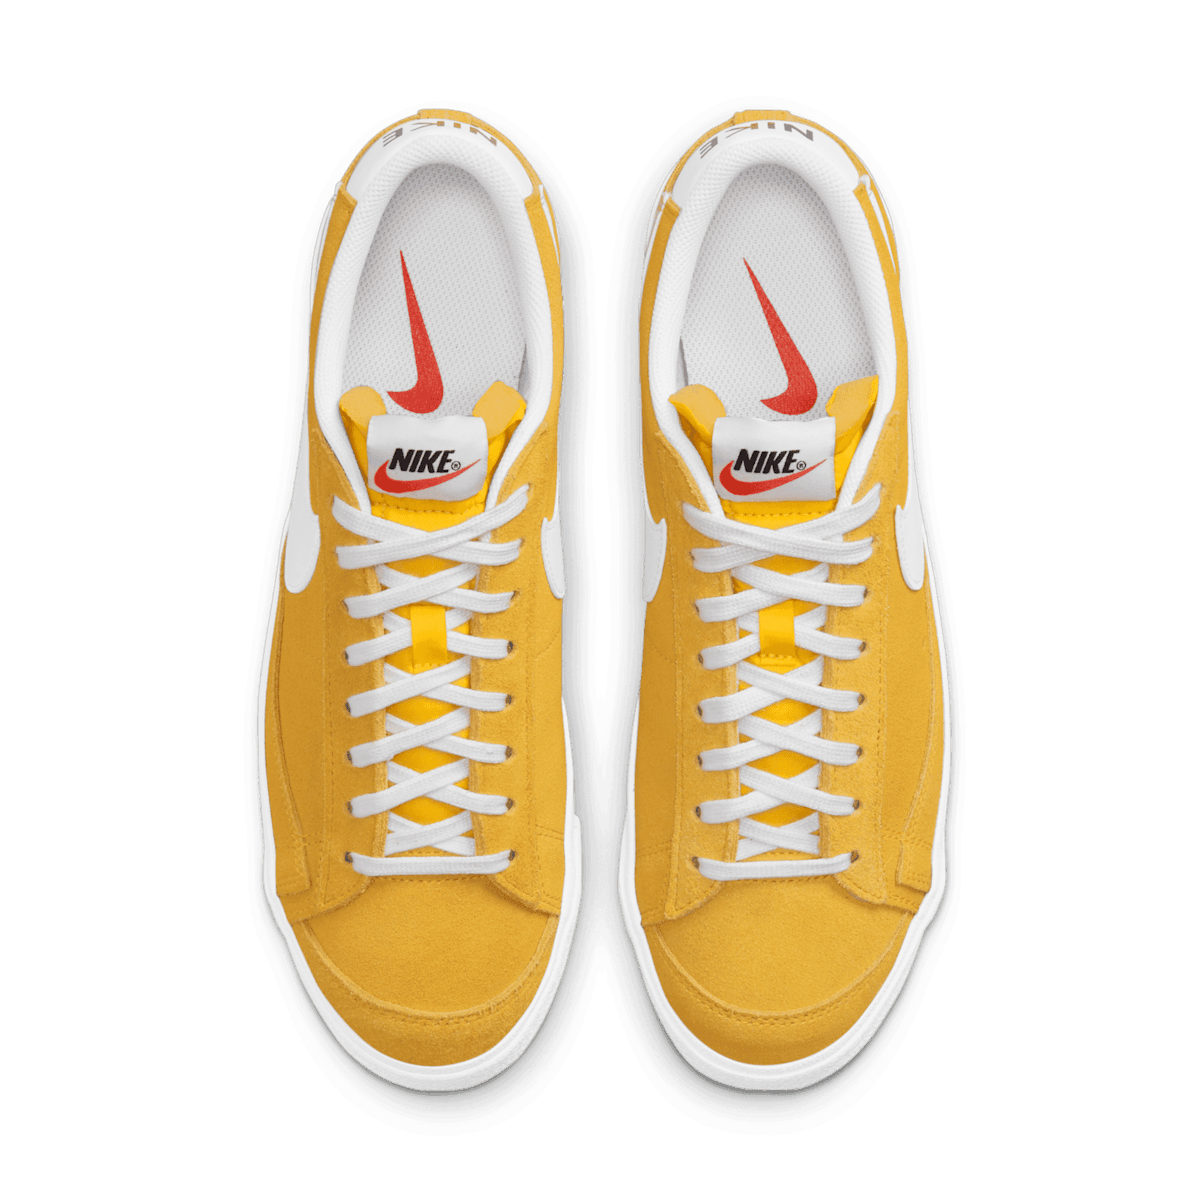 Nike Blazer Low '77 Shoes in Yellow Angle 1